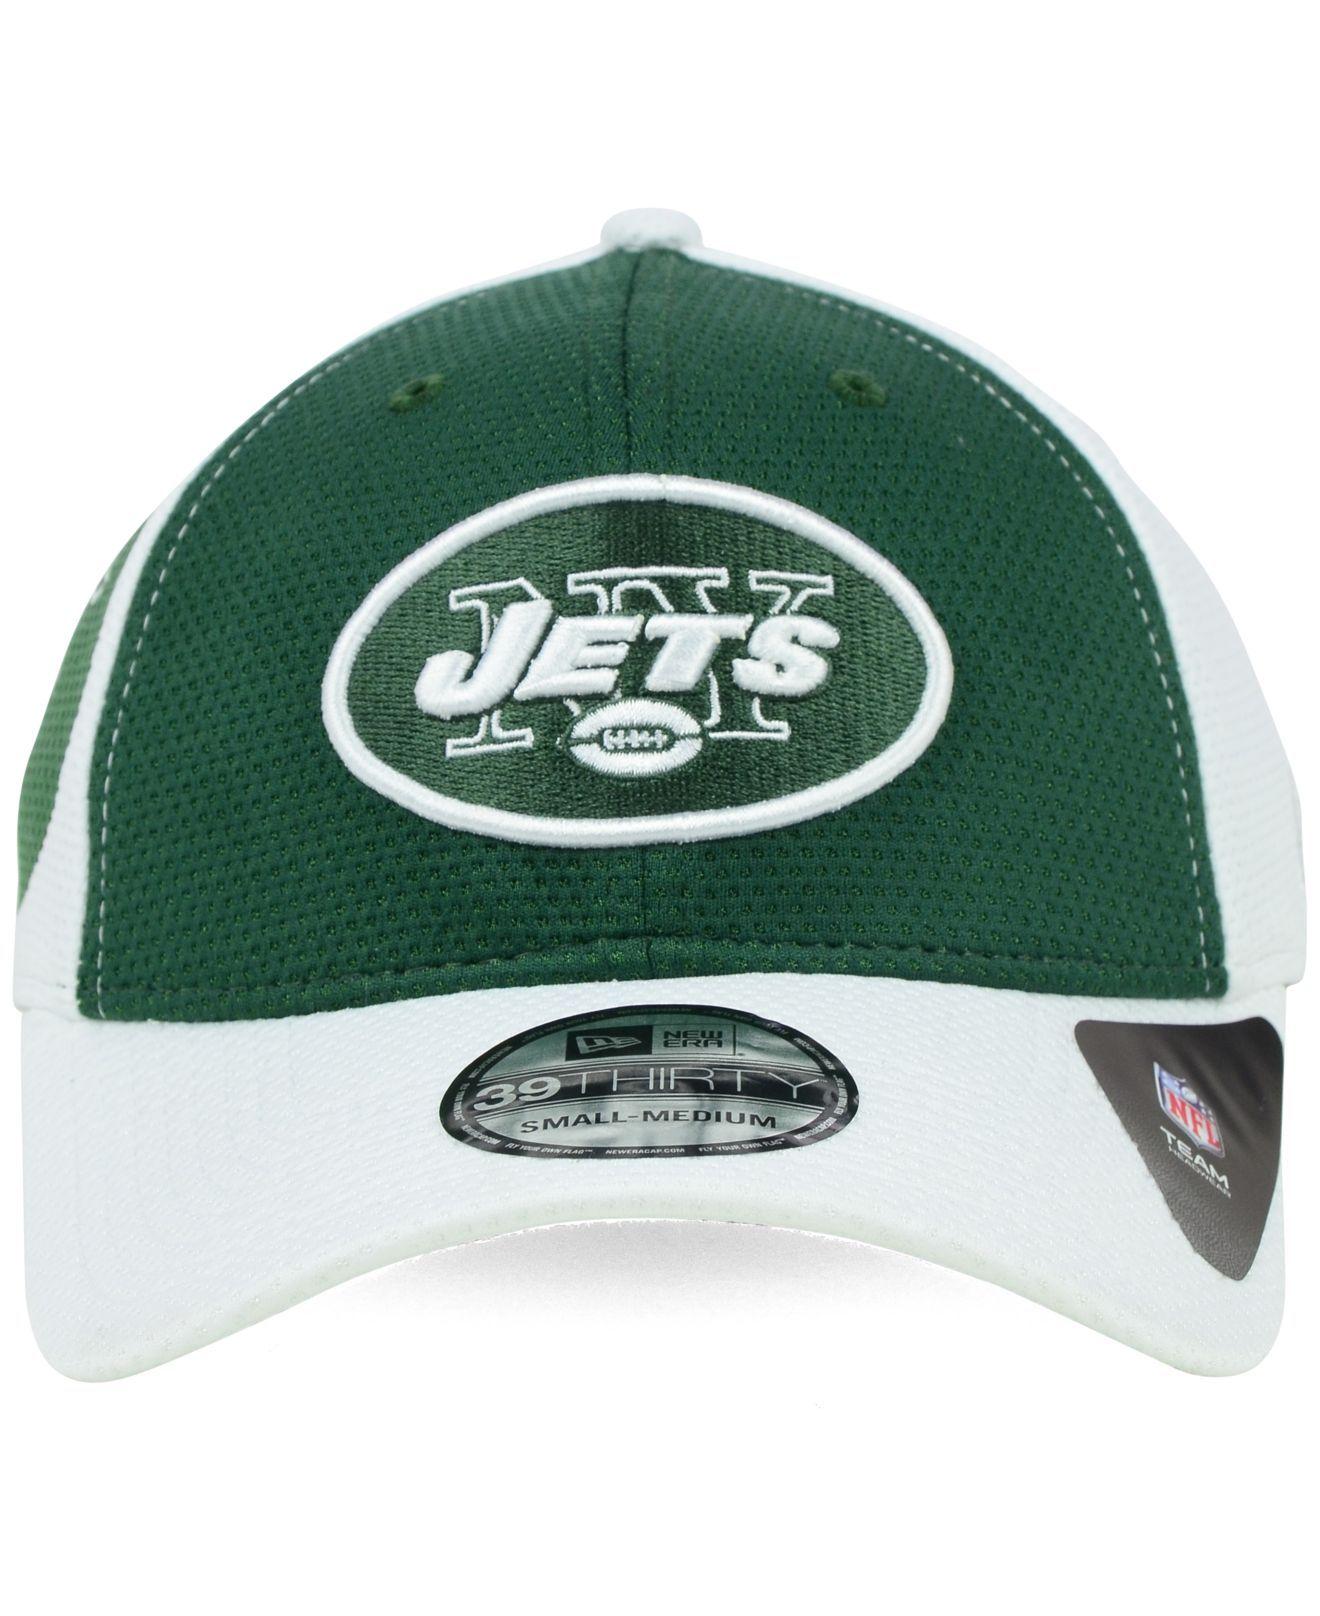 Small New York Jets Logo - Lyst New York Jets Logo Stretch 39thirty Cap in Green